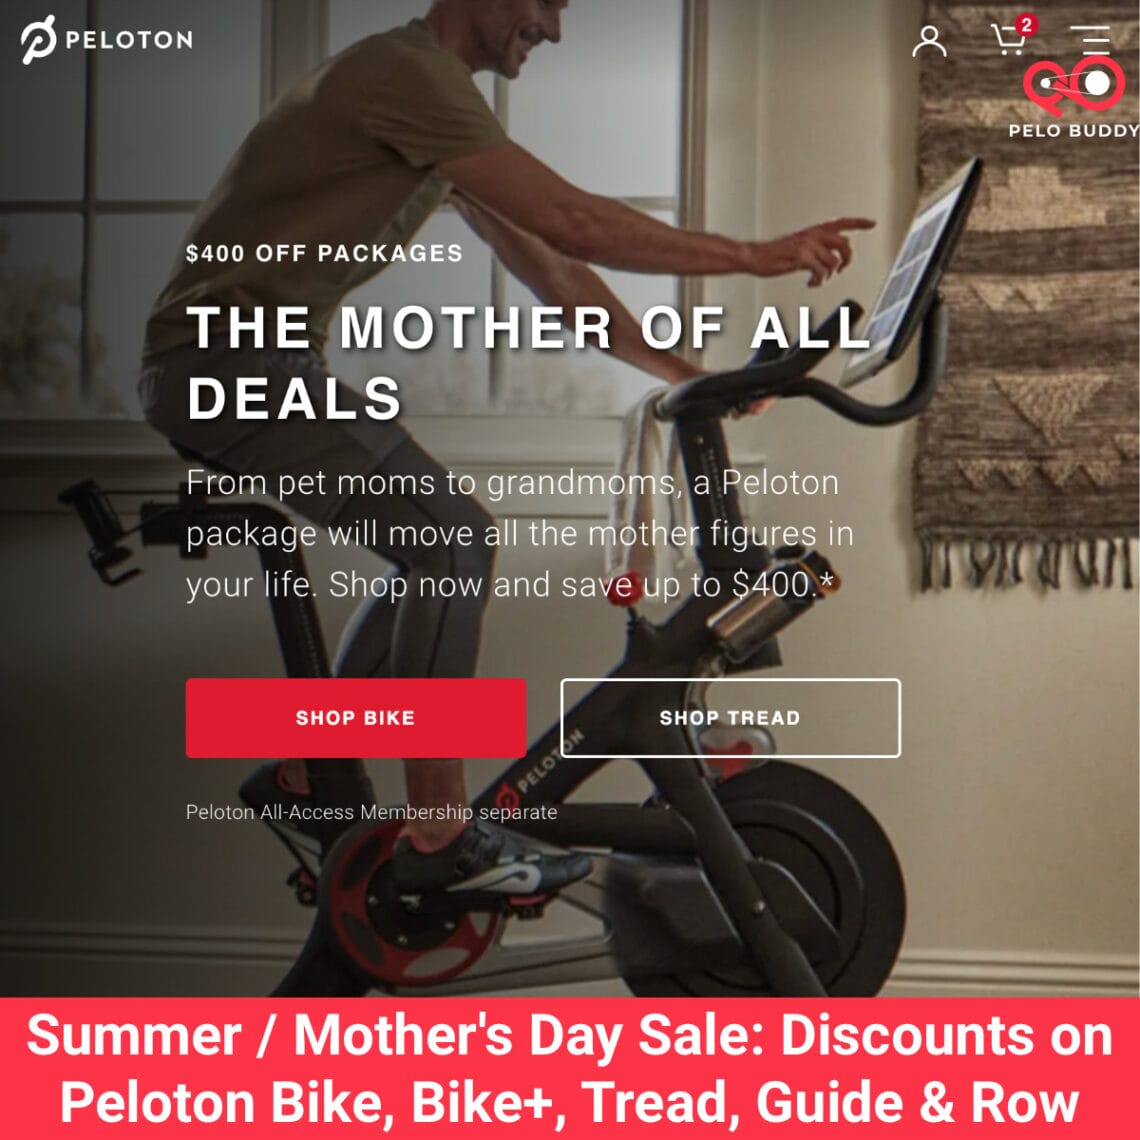 Summer / Mother's Day Peloton Sale for 2023 Discounts on Peloton Bike